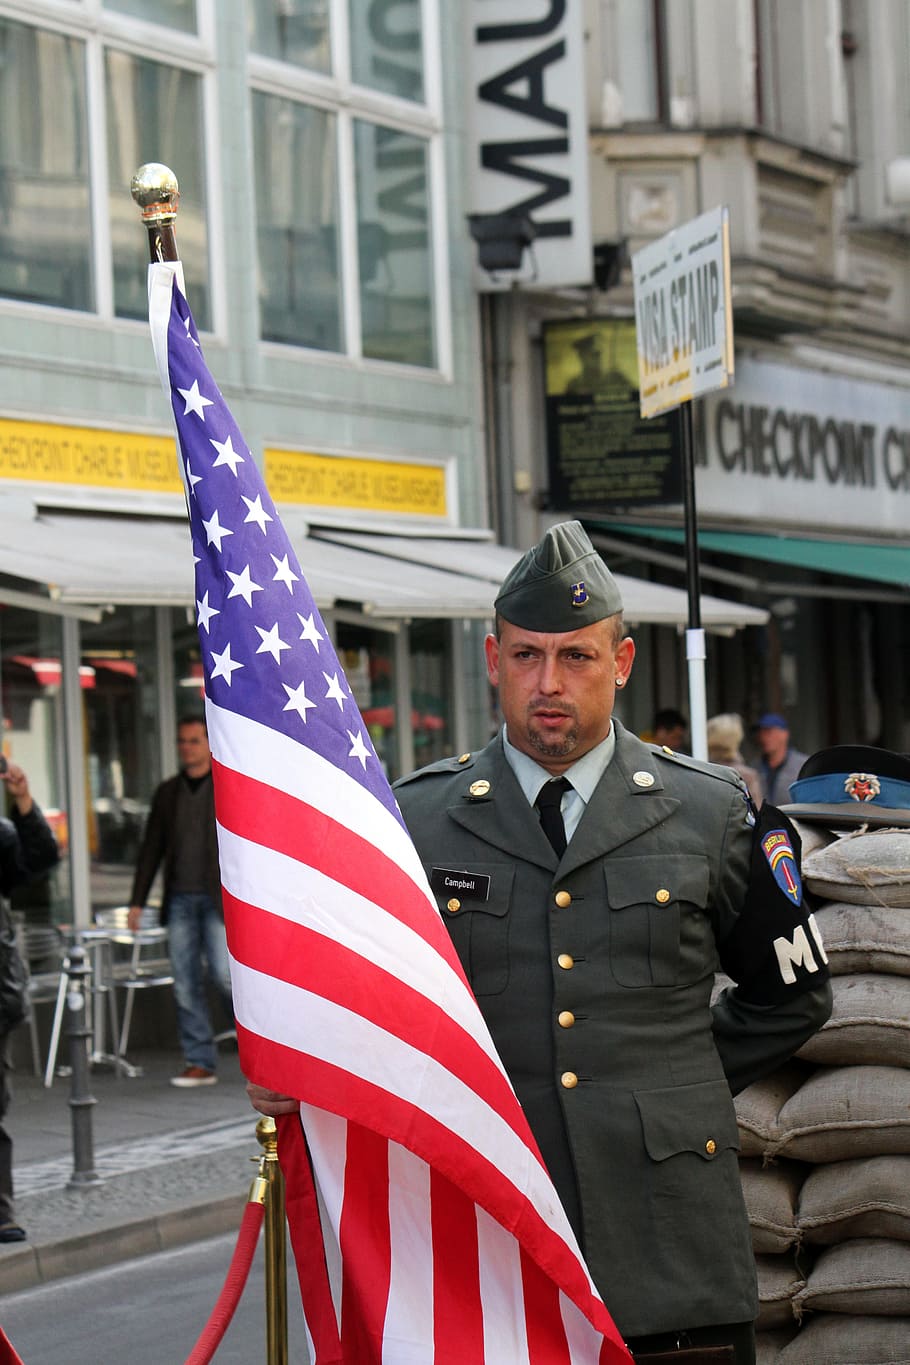 man holding USA flag near building during daytime, checkpoint